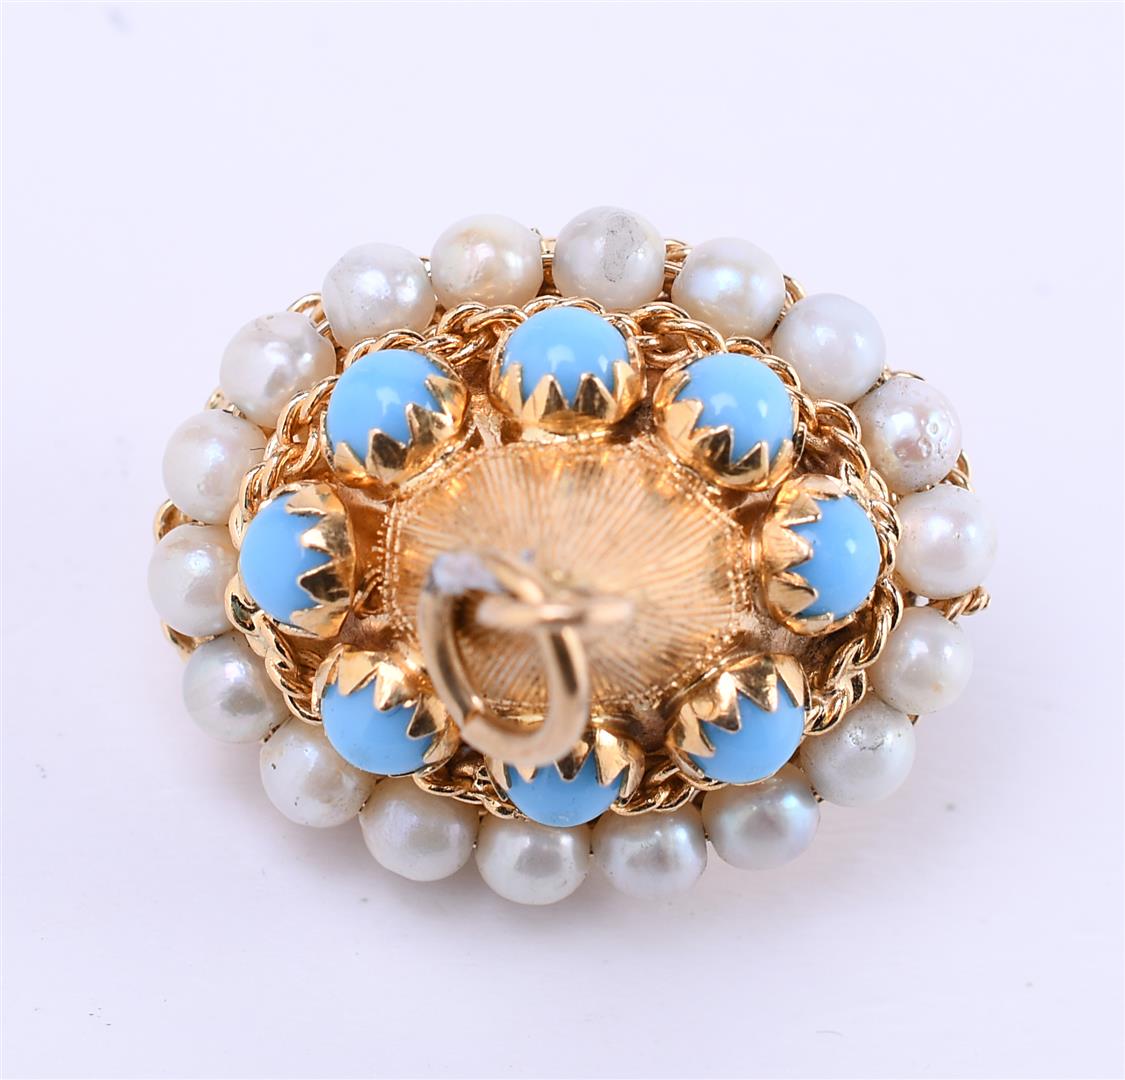 18 kt yellow gold pendant set with 18 freshwater pearls and turquoise - Image 4 of 5